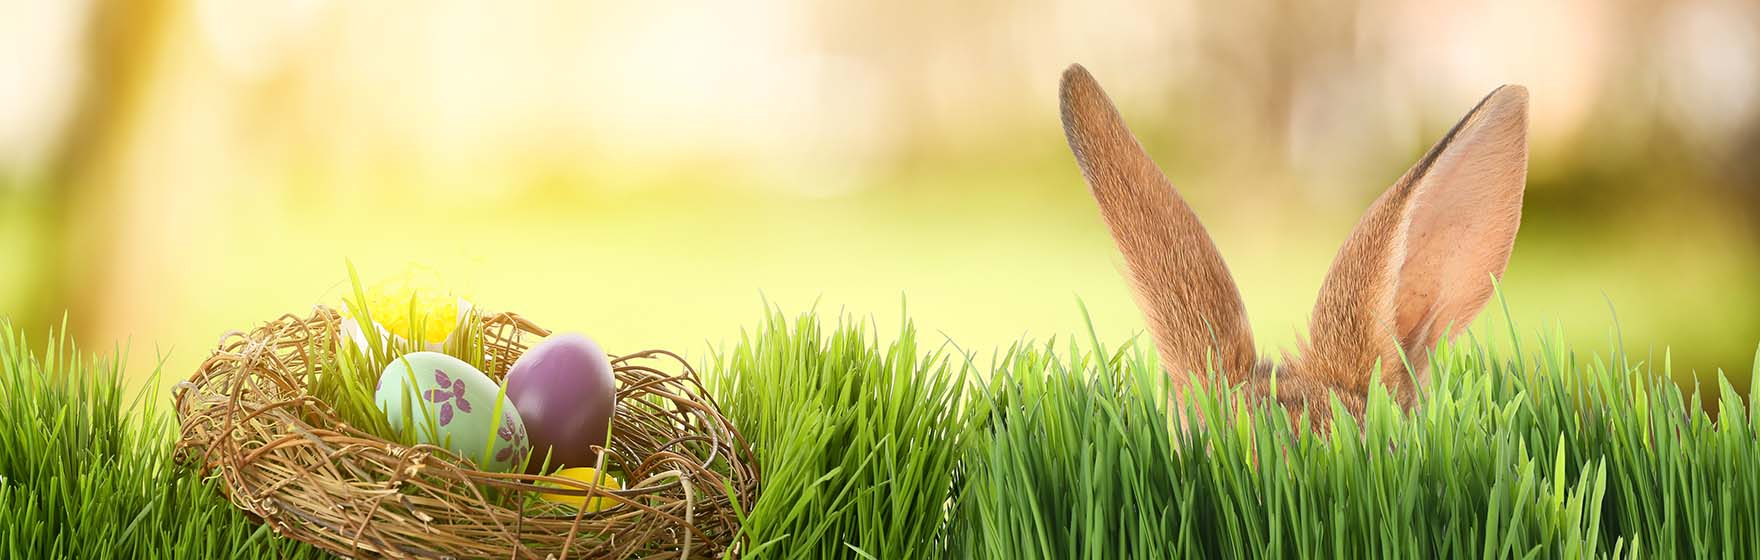 rabbit hiding in the grass beside a basket of painted egss